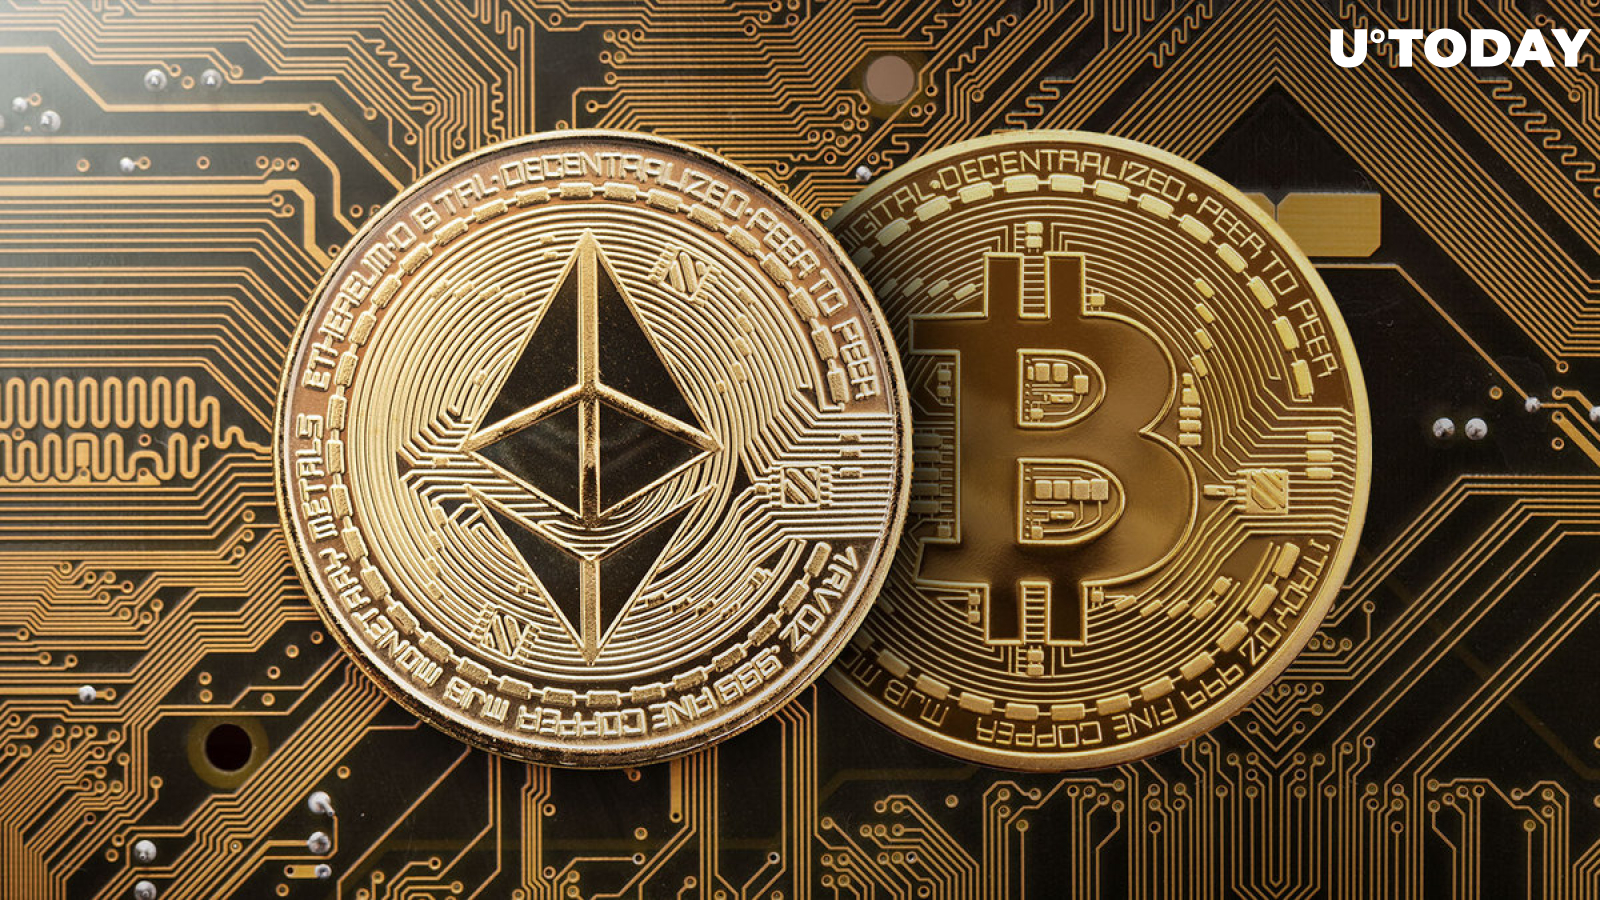 Guest Post by TheNewsCrypto: Ethereum Put Options Demand Signals Risk for ETH Price | CoinMarketCap